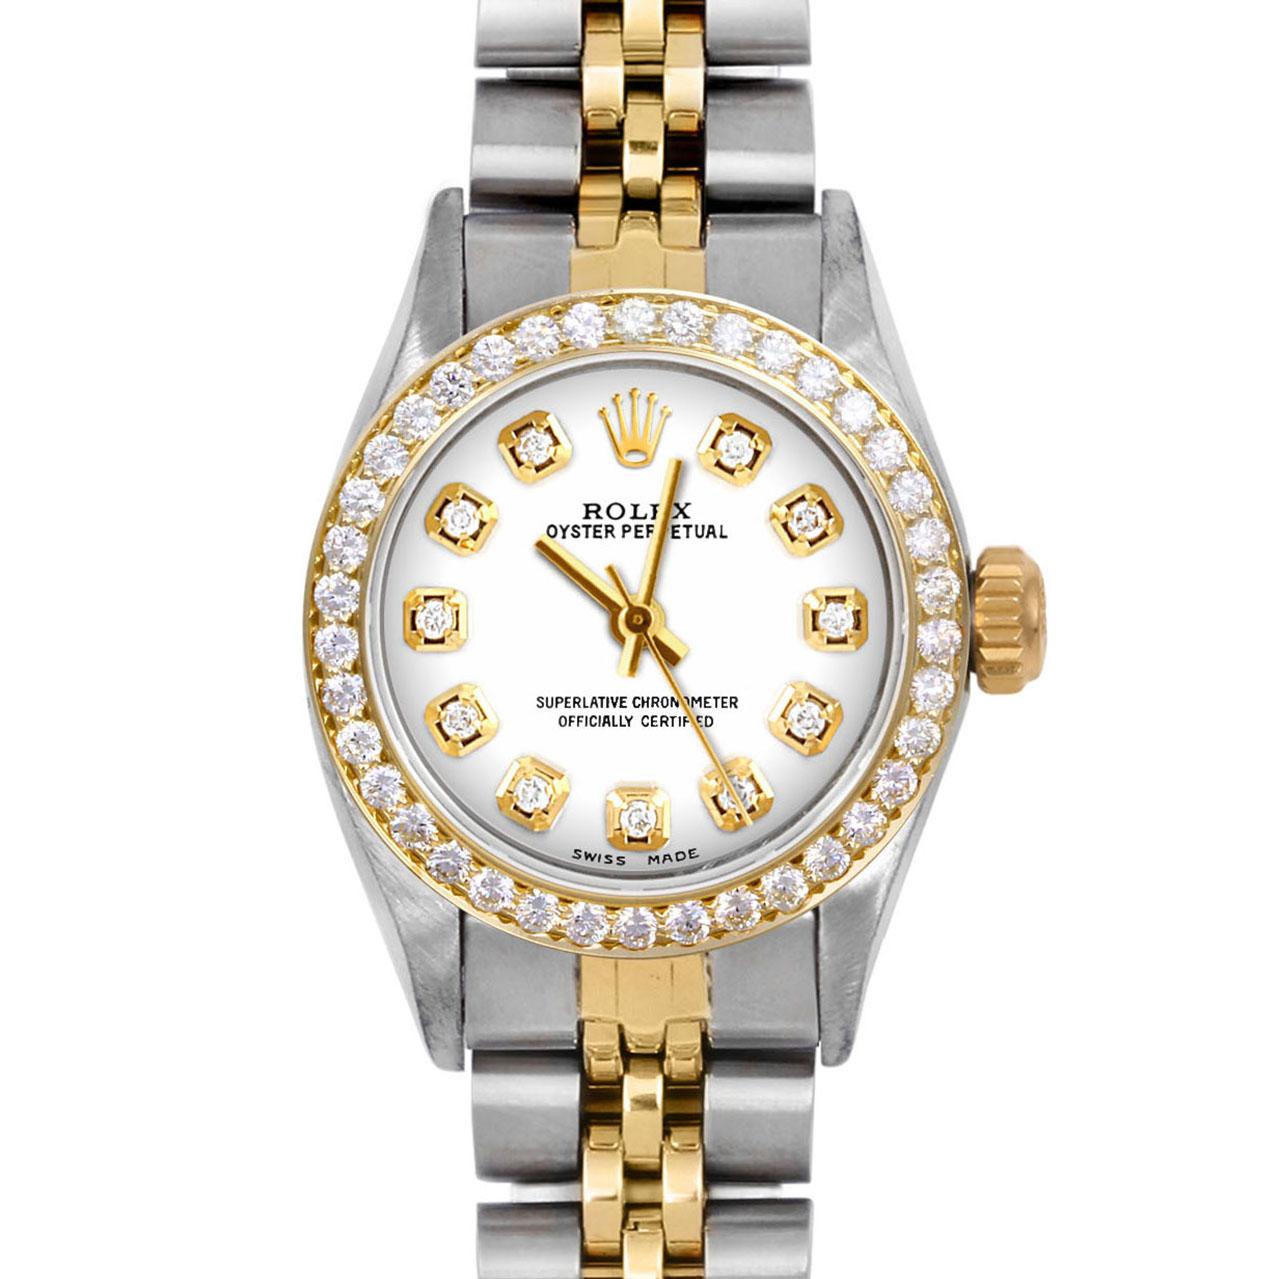 Brand : Rolex
Model : Oyster Perpetual 
Gender : Ladies
Metals : 14K Yellow Gold / Stainless Steel
Case Size : 24 mm

Dial : Custom White Diamond Dial (This dial is not original Rolex And has been added aftermarket yet is a beautiful Custom